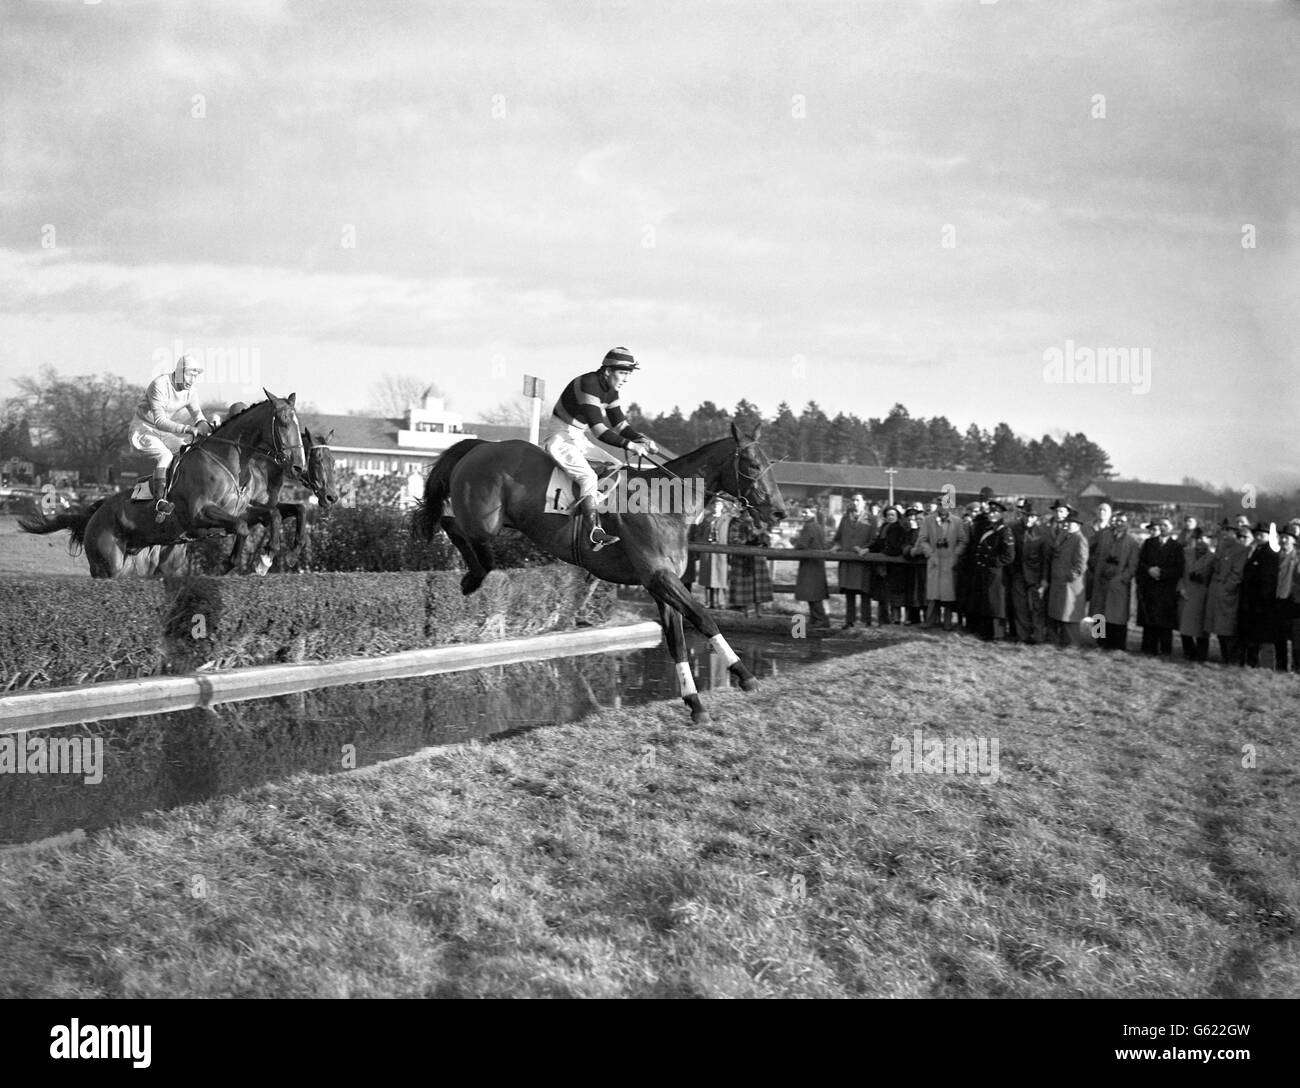 'Coloured School Boy' with Cromwell up takes a jump during the Blindley Health Chase at Lingfield. Stock Photo